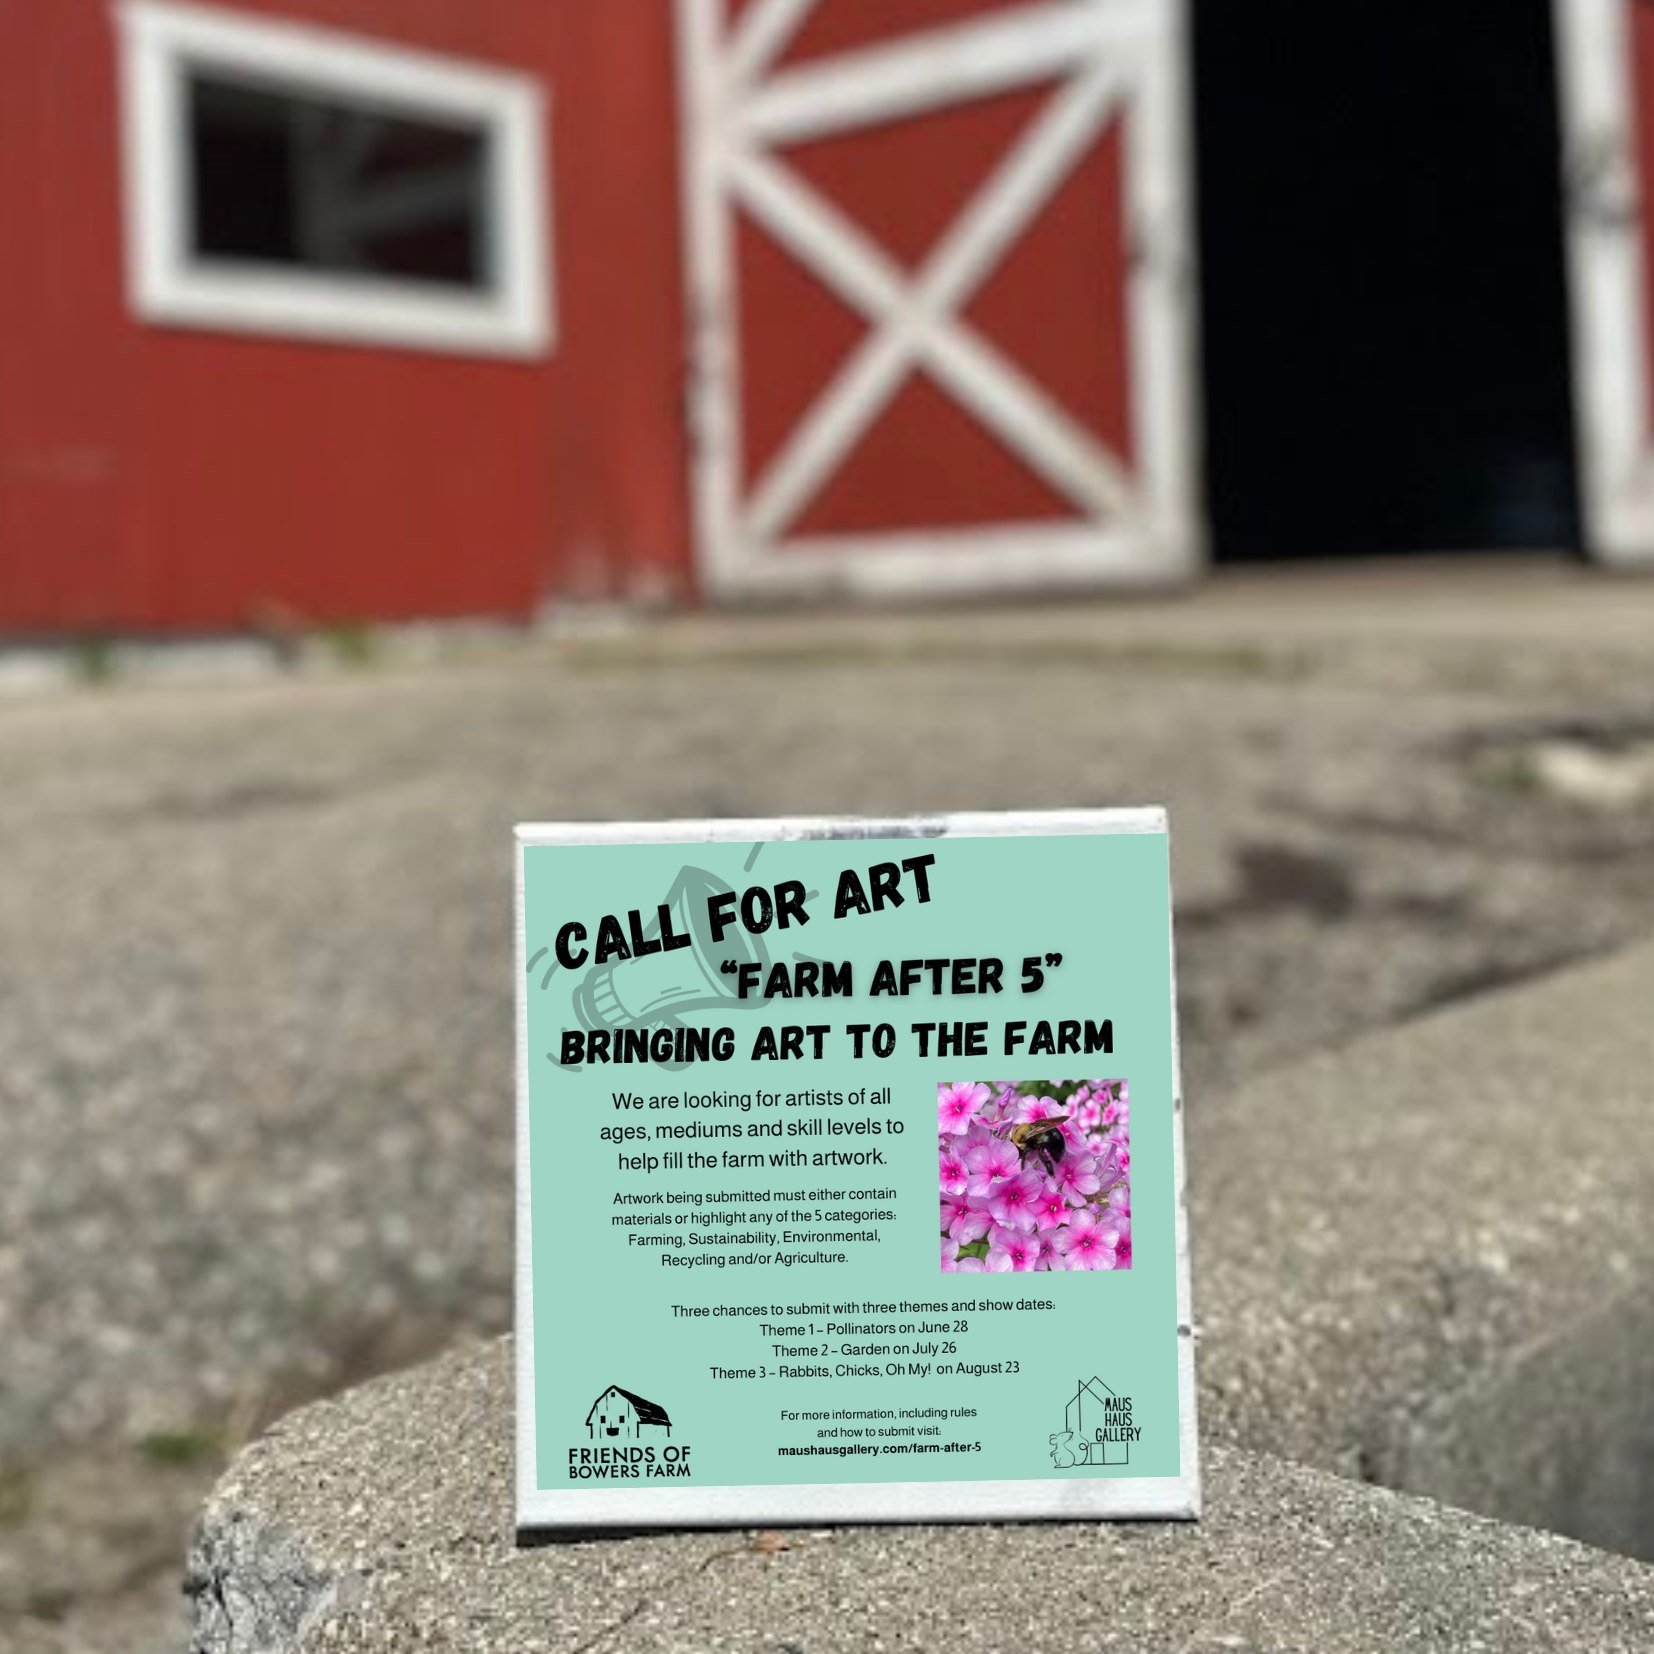 Call for Art: BOWERS SCHOOL FARM &amp; MAUS HAUS GALLERY ARE BRINGING ART TO THE FARM
~
Seeking artists of all ages, mediums, and skill levels to help fill the farm with artwork. The artwork will be part of a scavenger hunt walk throughout the proper